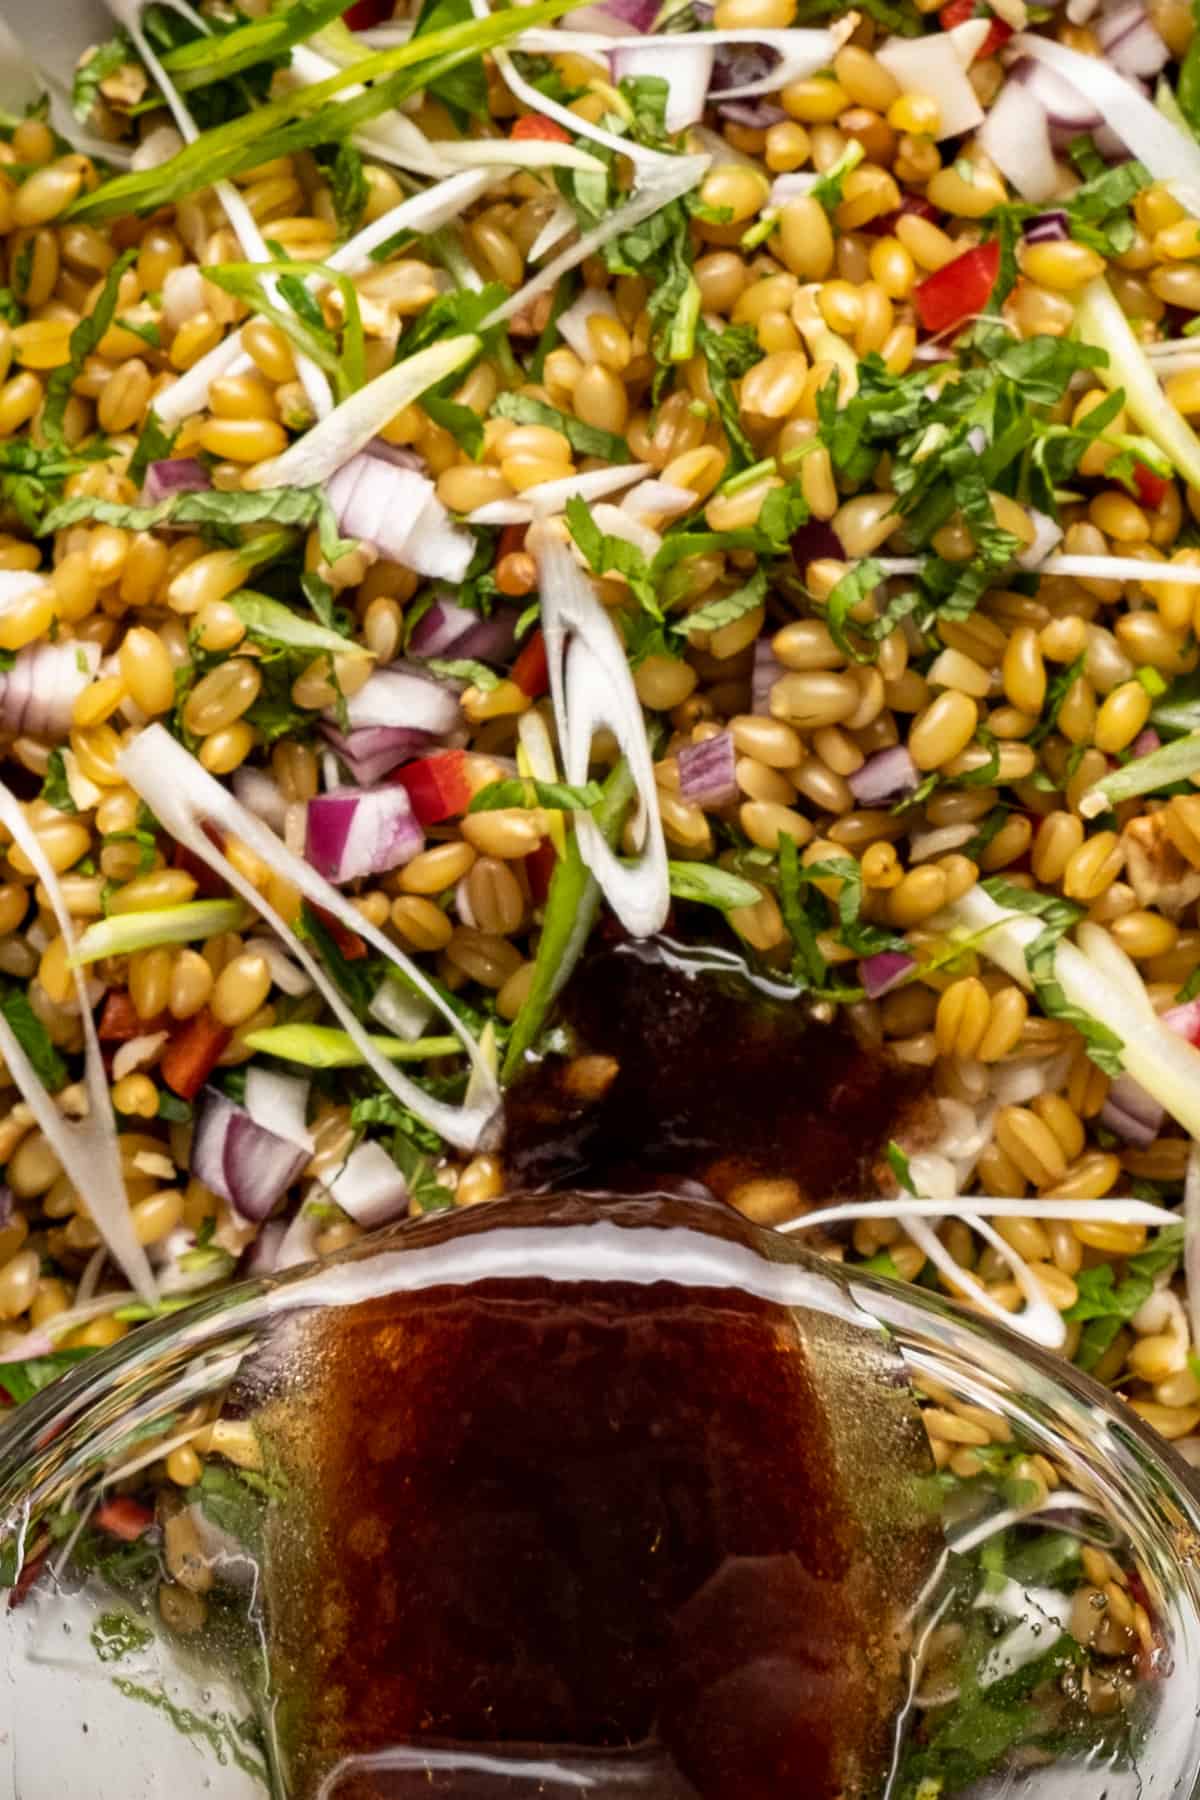 Pomegranate molasses dressing is being poured from a glass bowl over wheat berry salad.